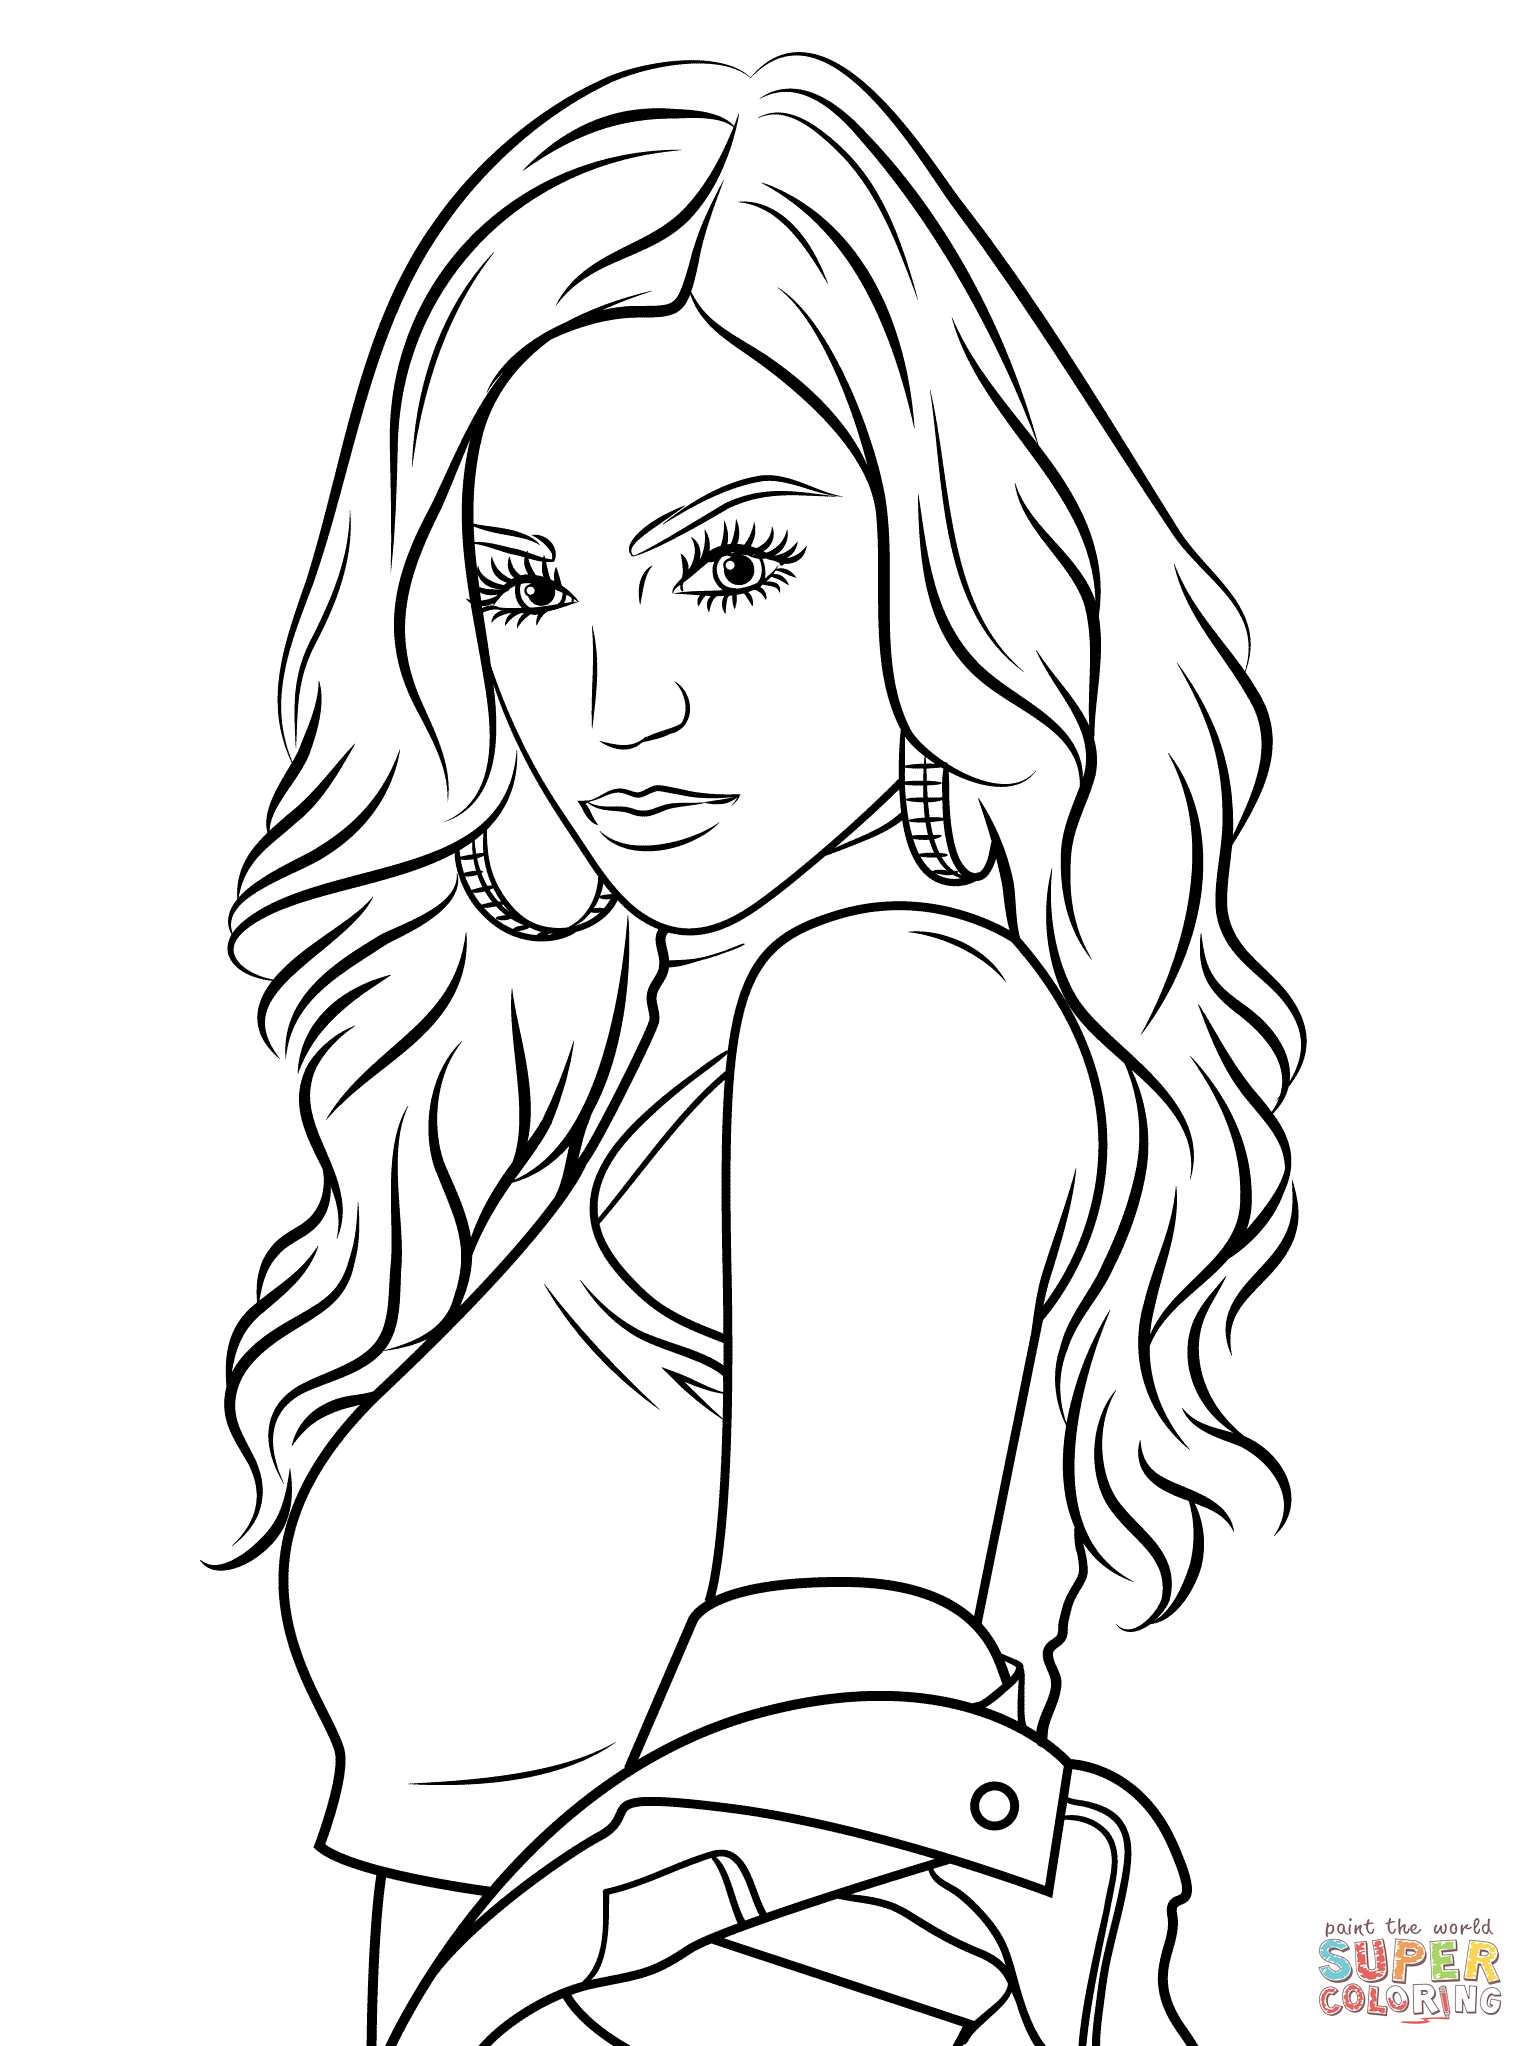 Printable Coloring Pages Of Realistic Girls